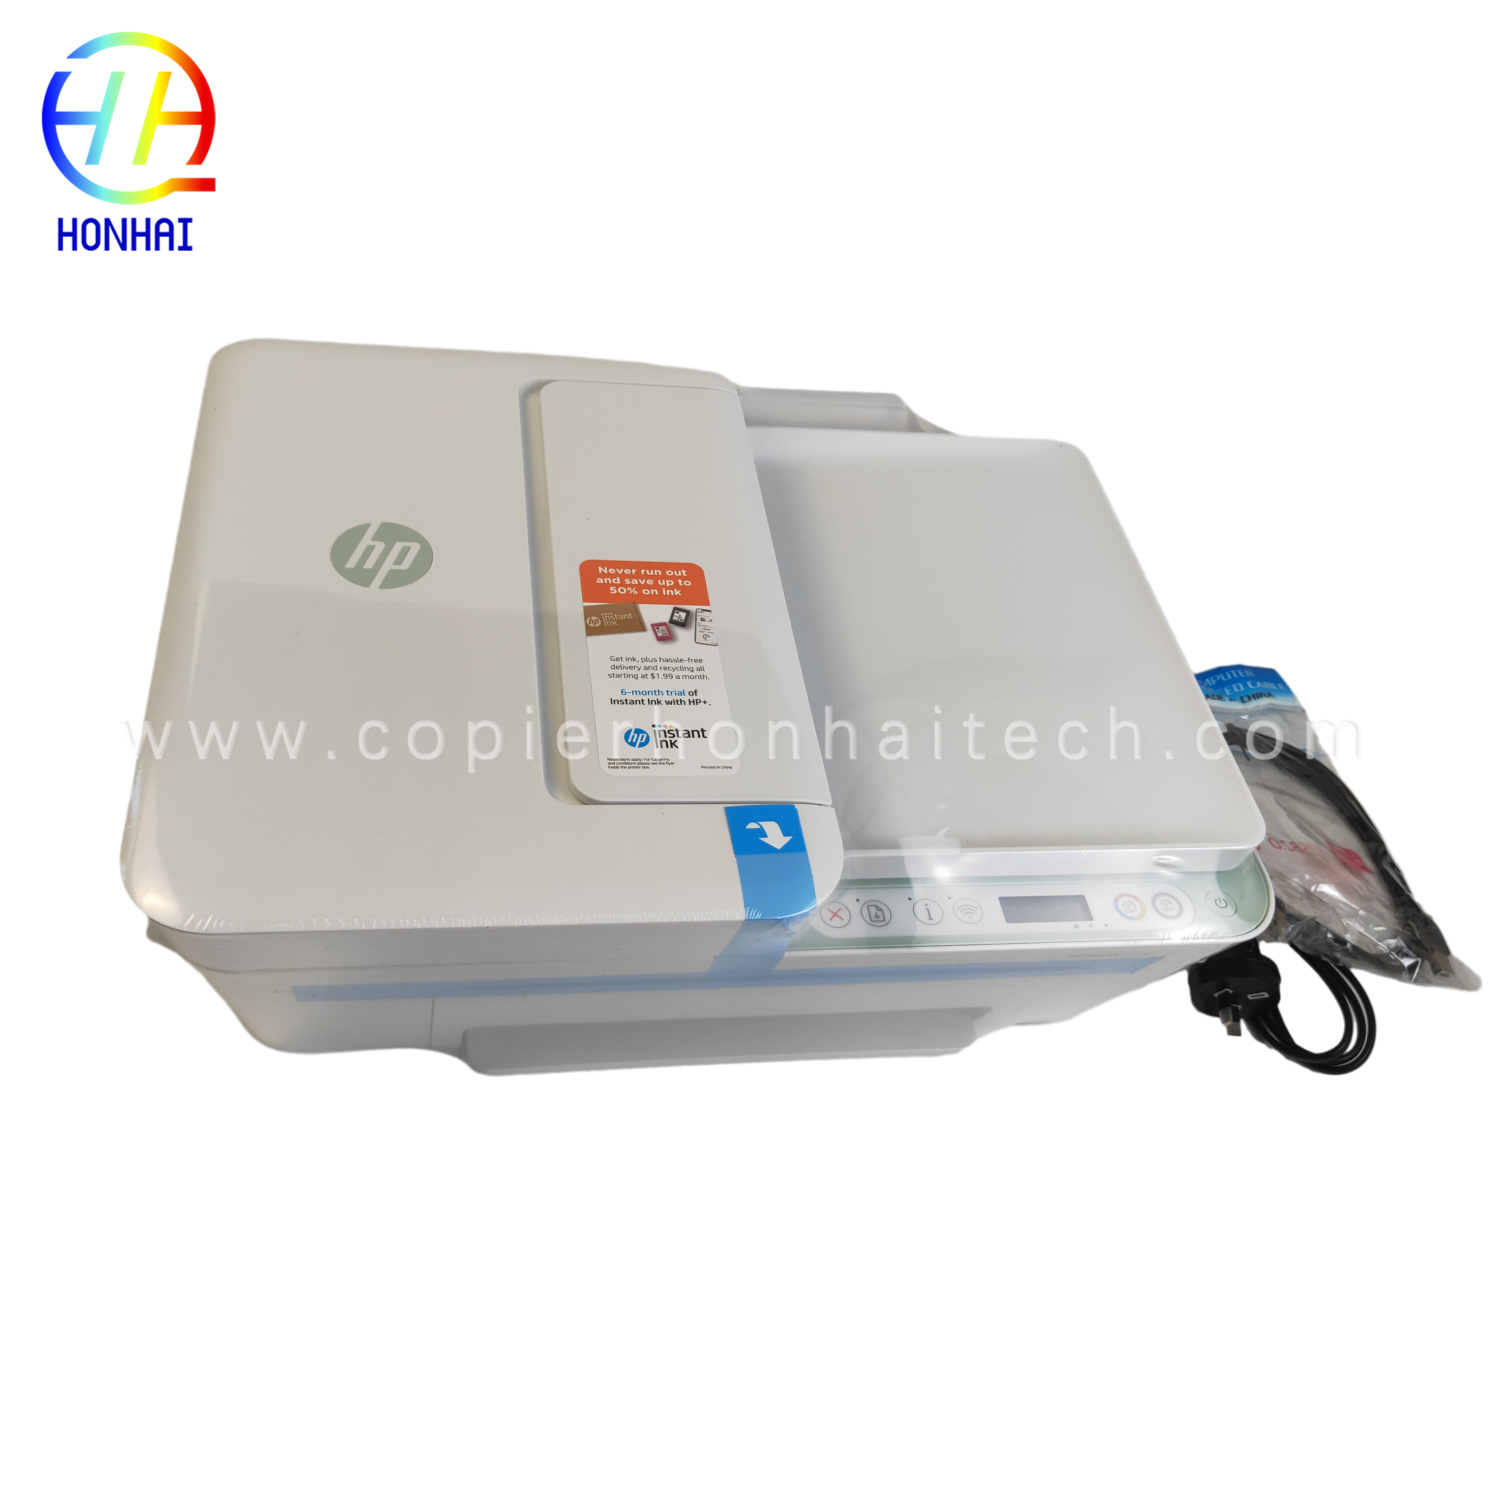 https://www.copierhonhaitech.com/original-new-wireless-printer-for-hp-deskjet-4122e-all-in-one-printer-scan-and-copy-home-office-students-and-home- printer-26q96a-product/